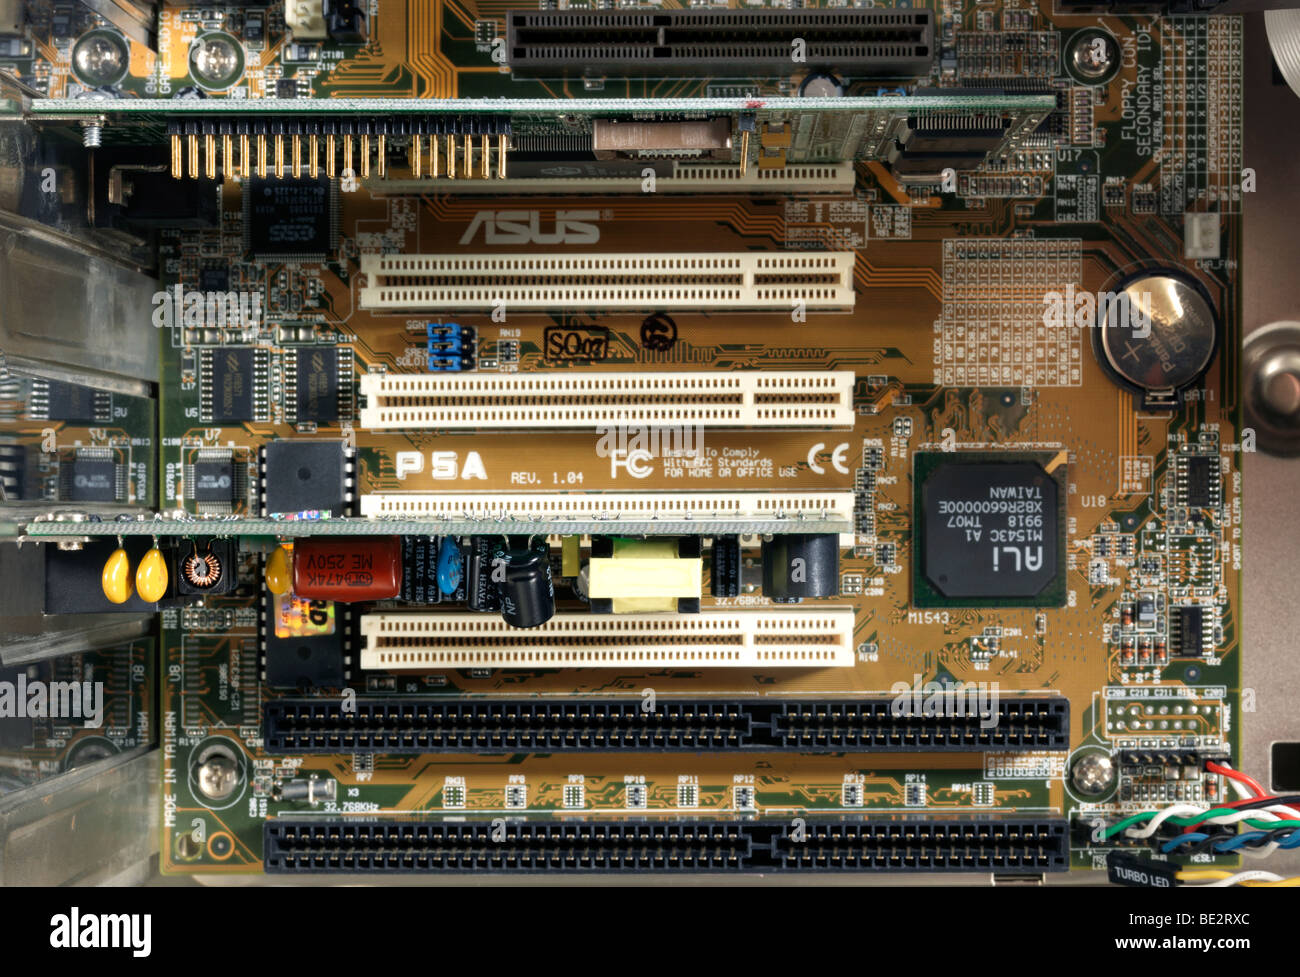 AGP and PCI slots on a motherboard of PC Inside Computer With AGP slot in  use Stock Photo - Alamy